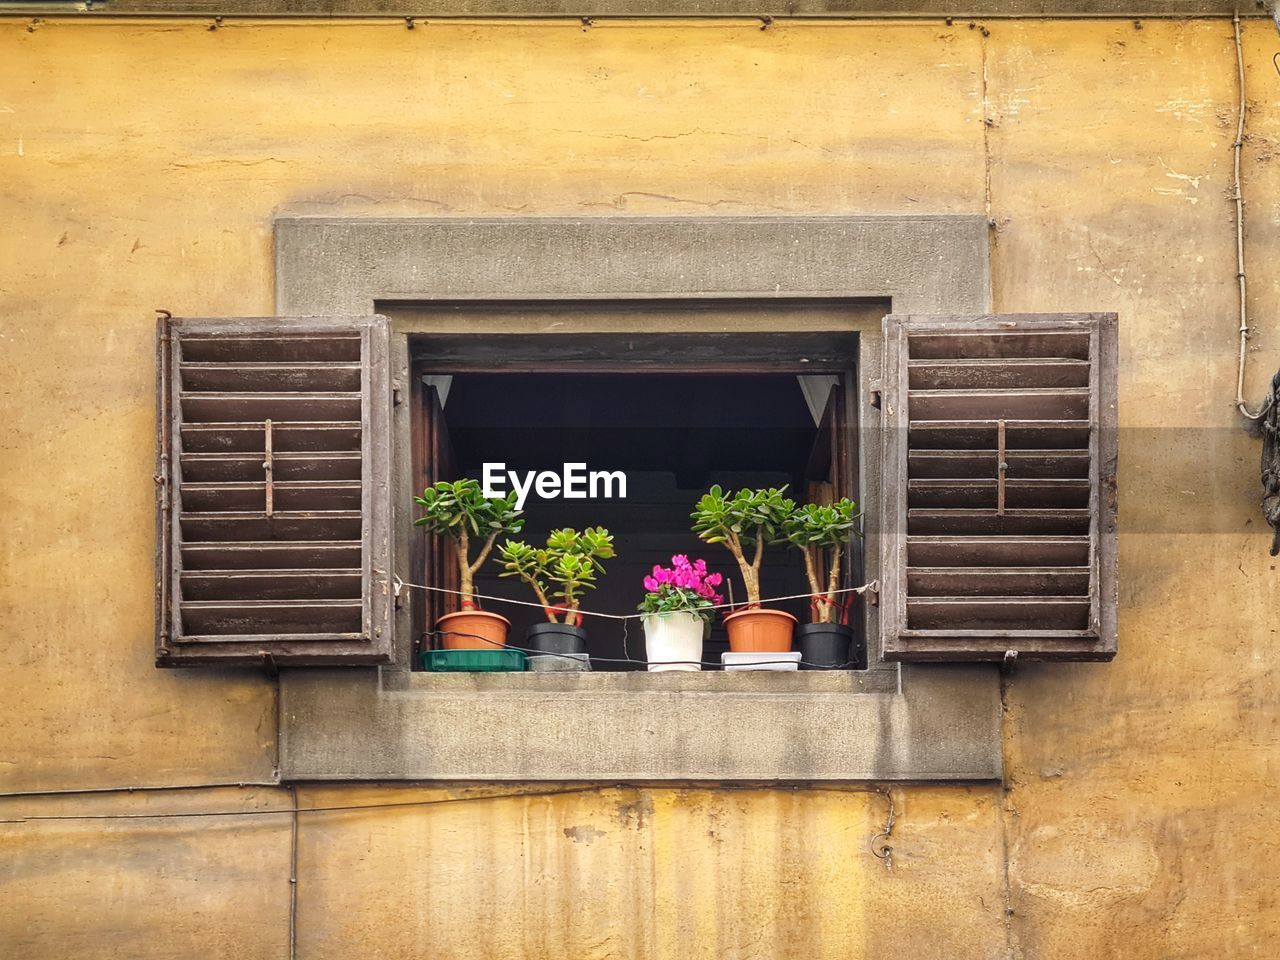 POTTED PLANT ON WINDOW SILL OF BUILDING